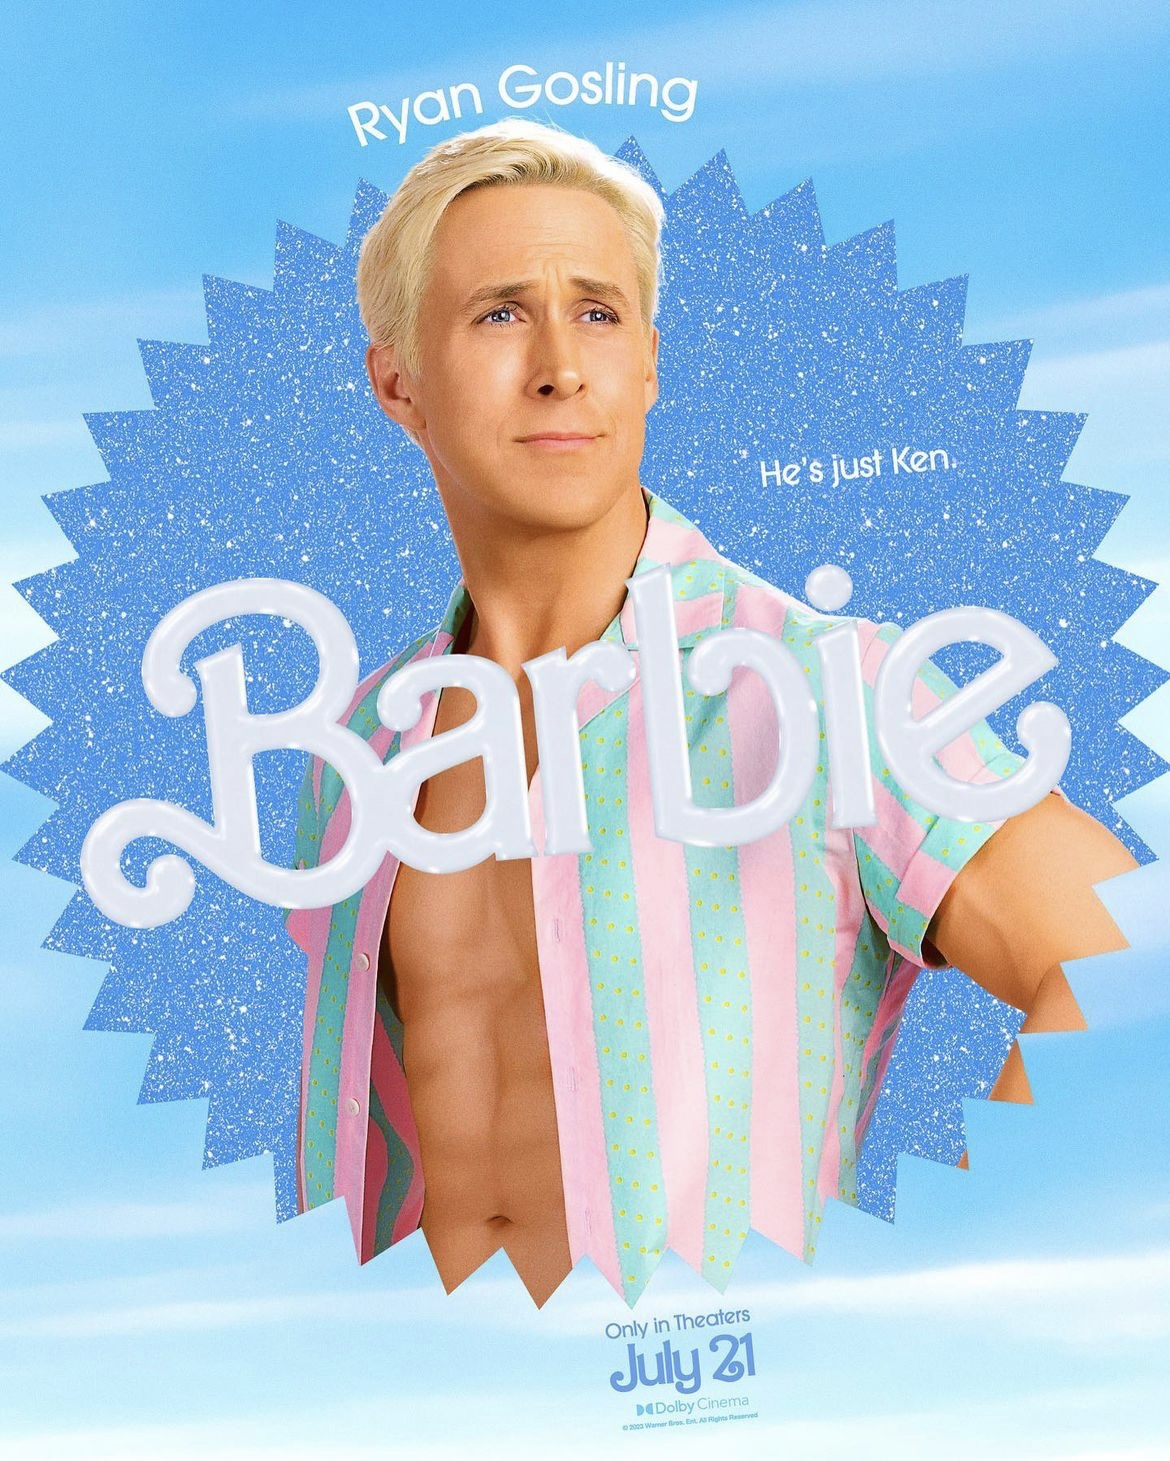 Is the Barbie movie kid-friendly? What parents need to know